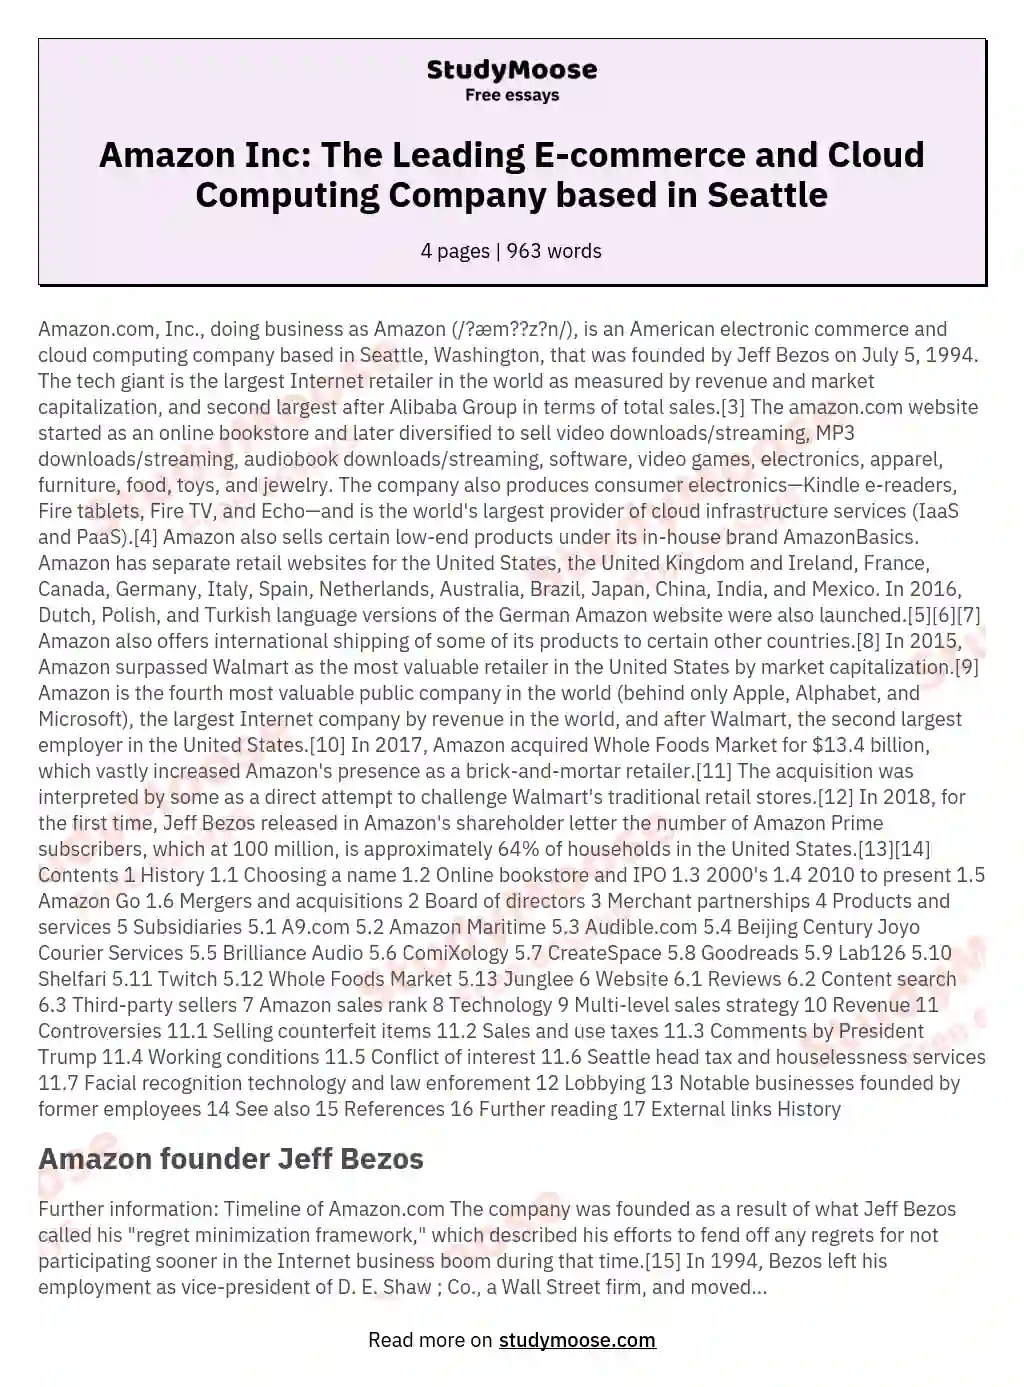 Amazon Inc: The Leading E-commerce and Cloud Computing Company based in Seattle essay